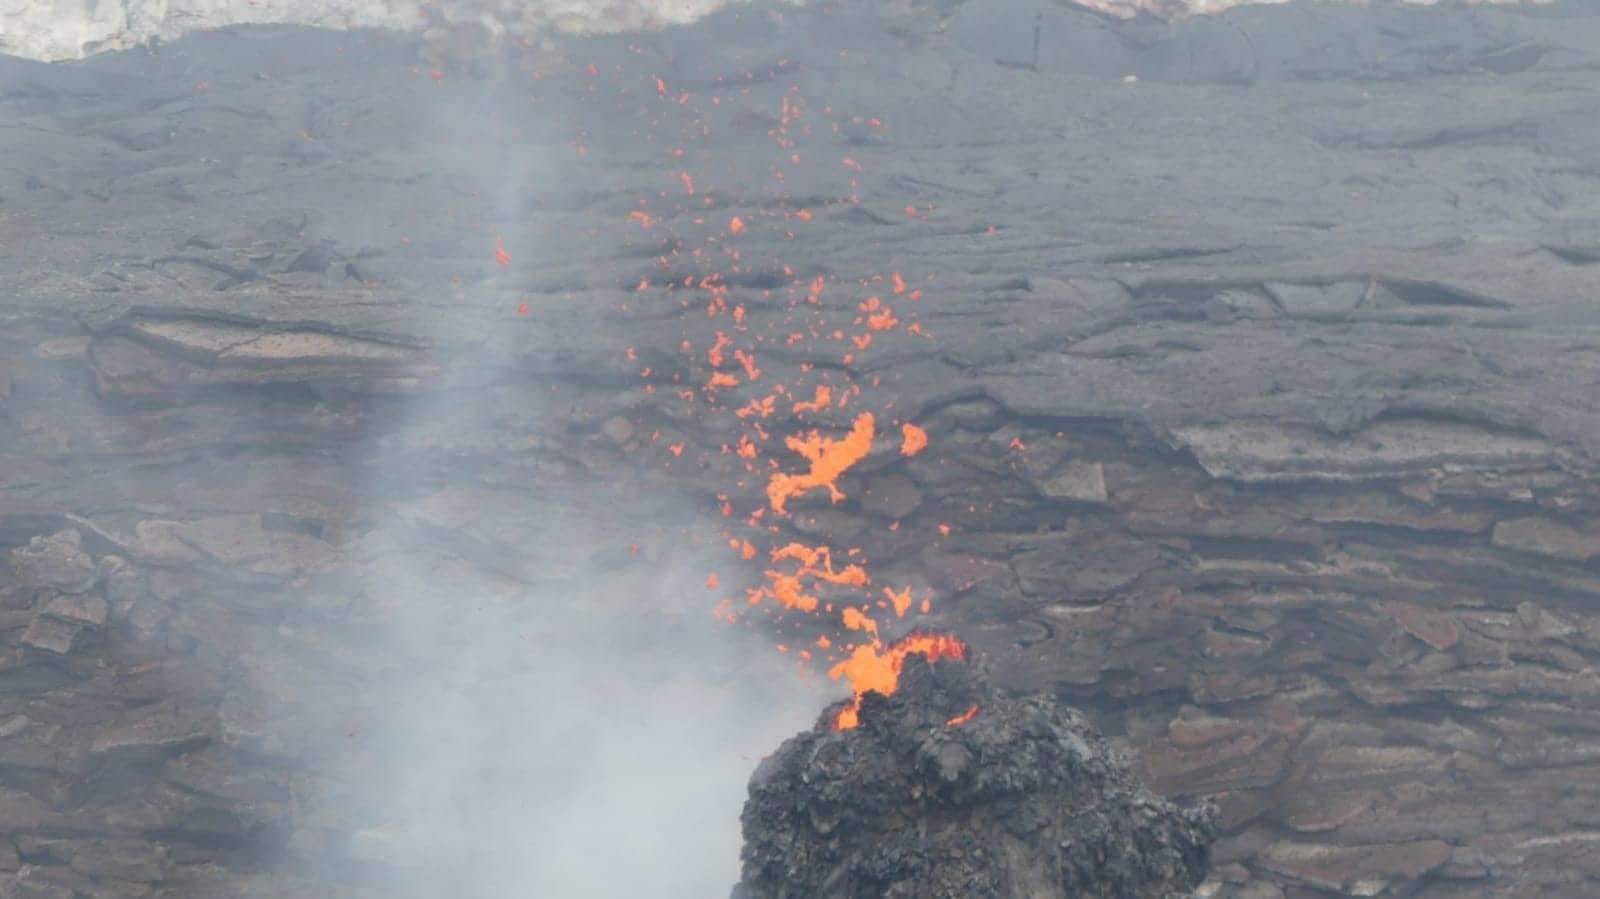 The lava spatters through the hornito formed in the northern pit crater (image: Enku Mulugeta)